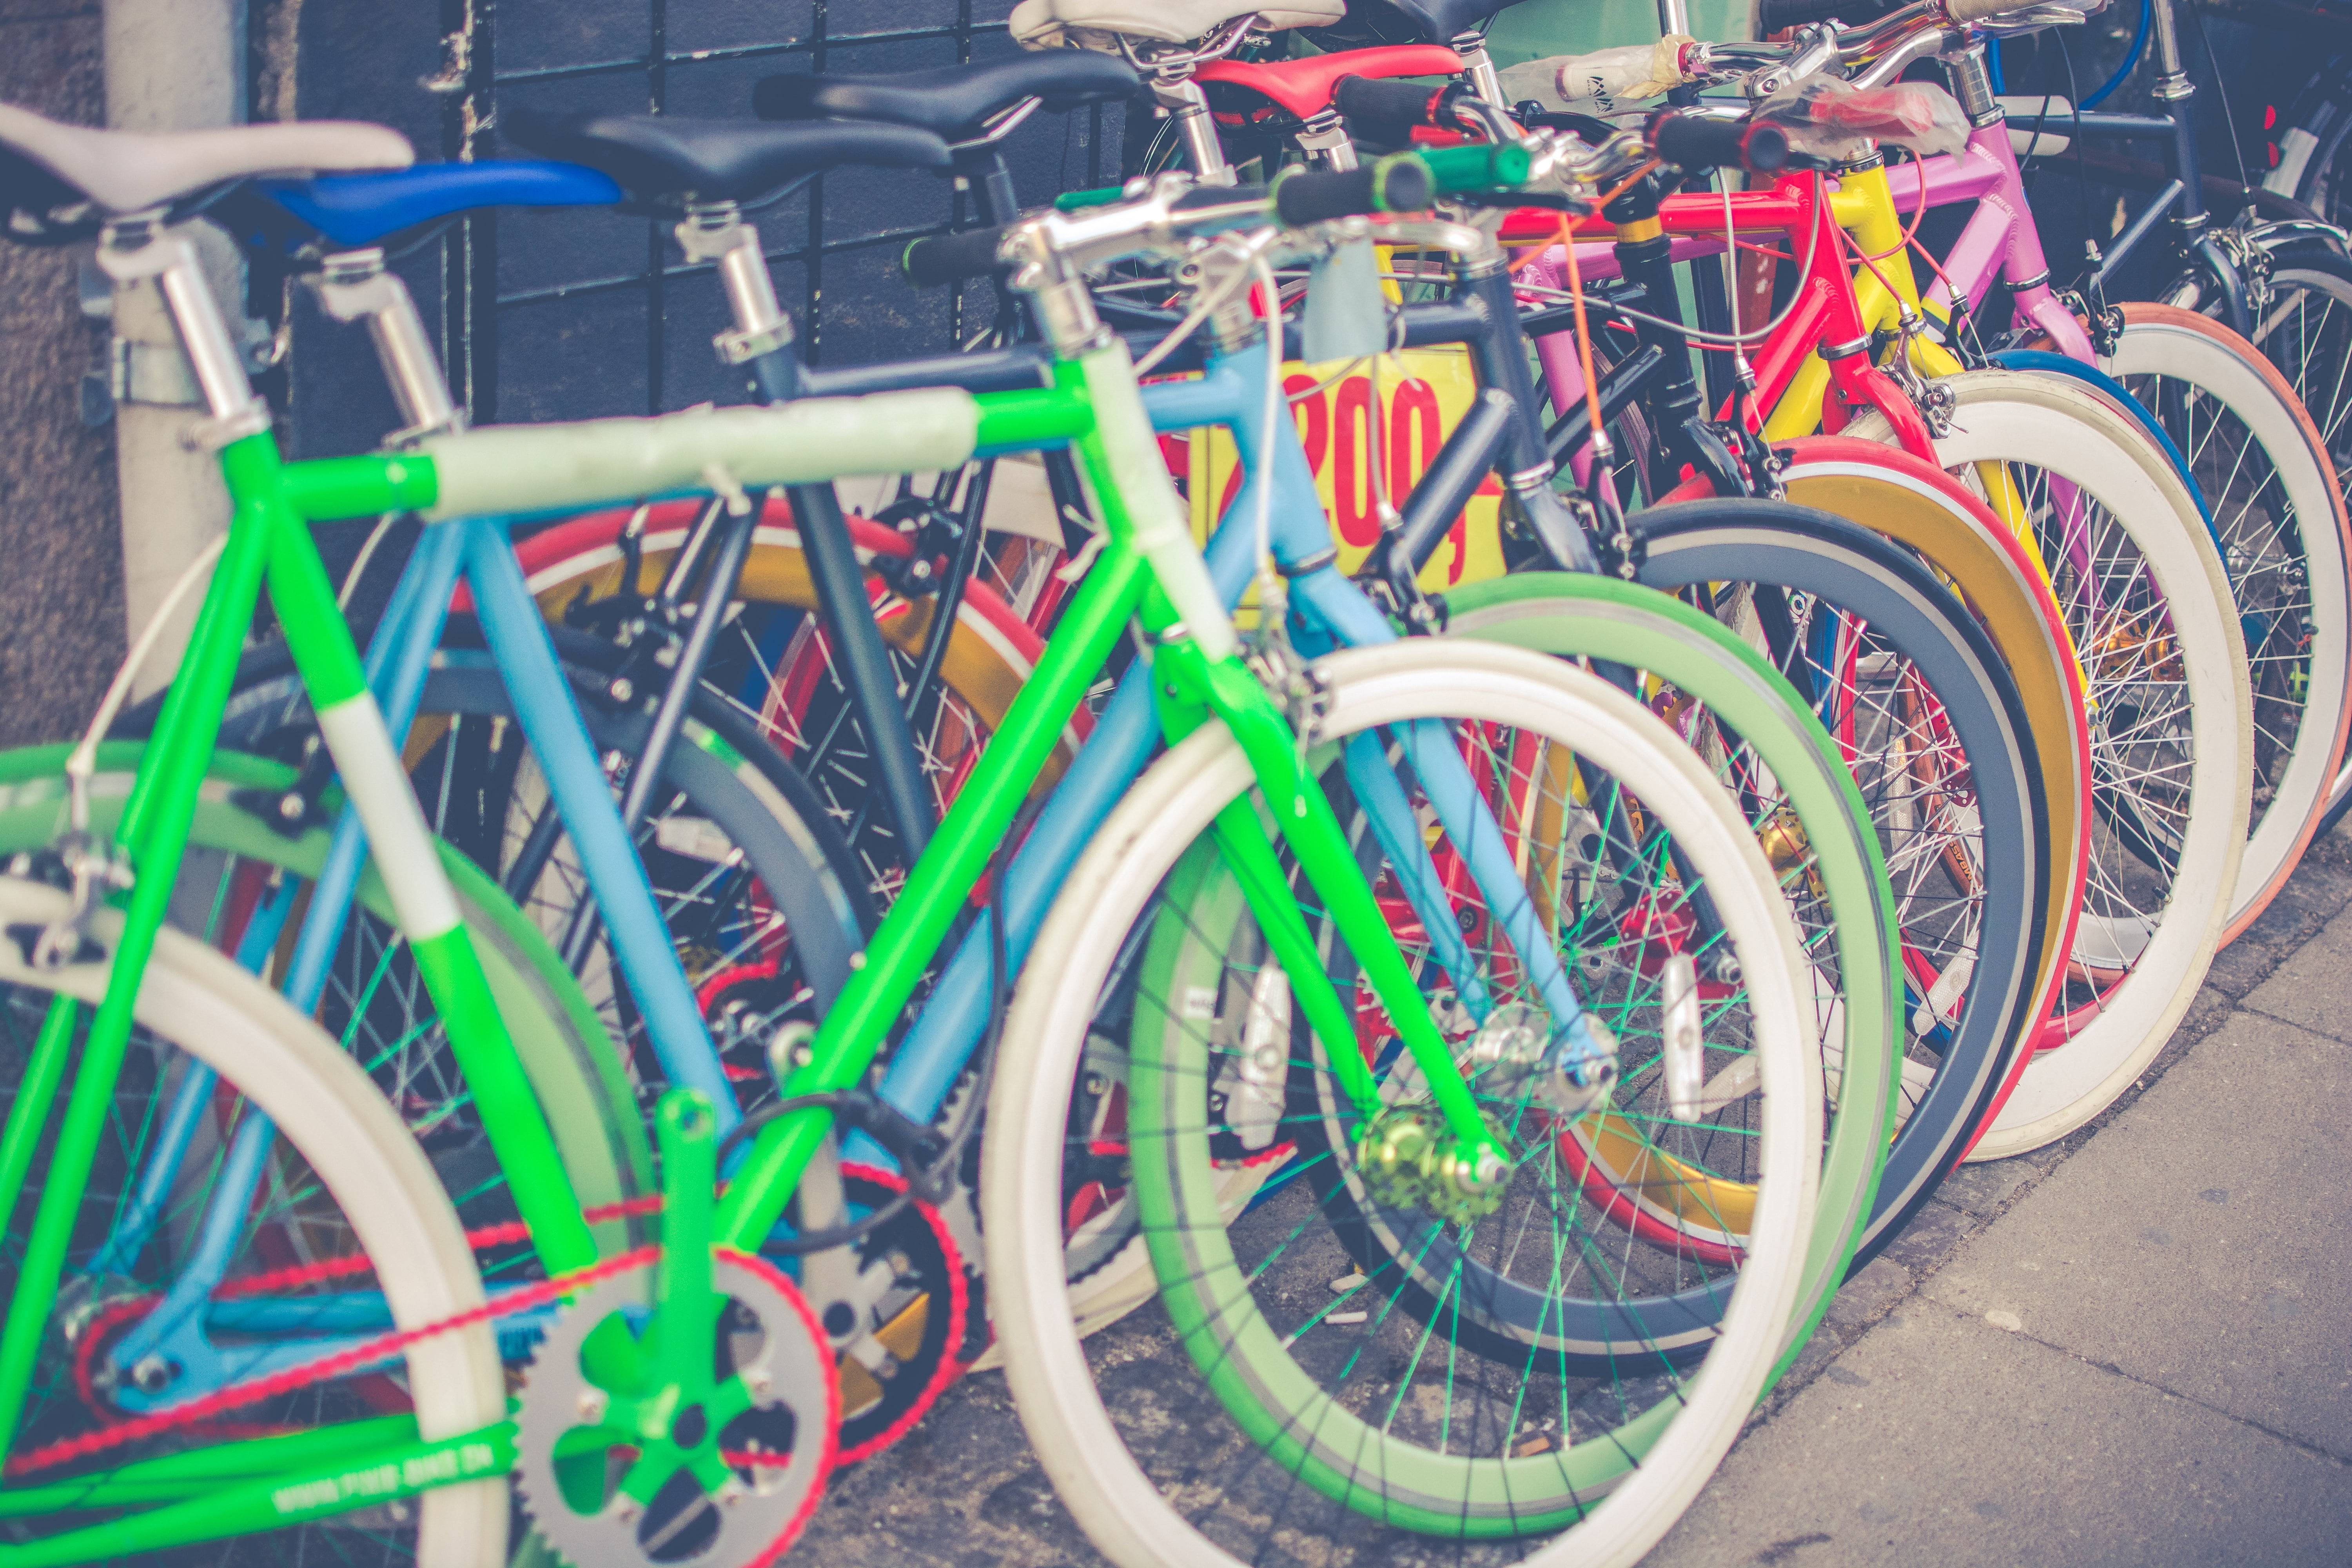 Assorted-color bike lot, Bicycles, Parking, Multicolored HD ...